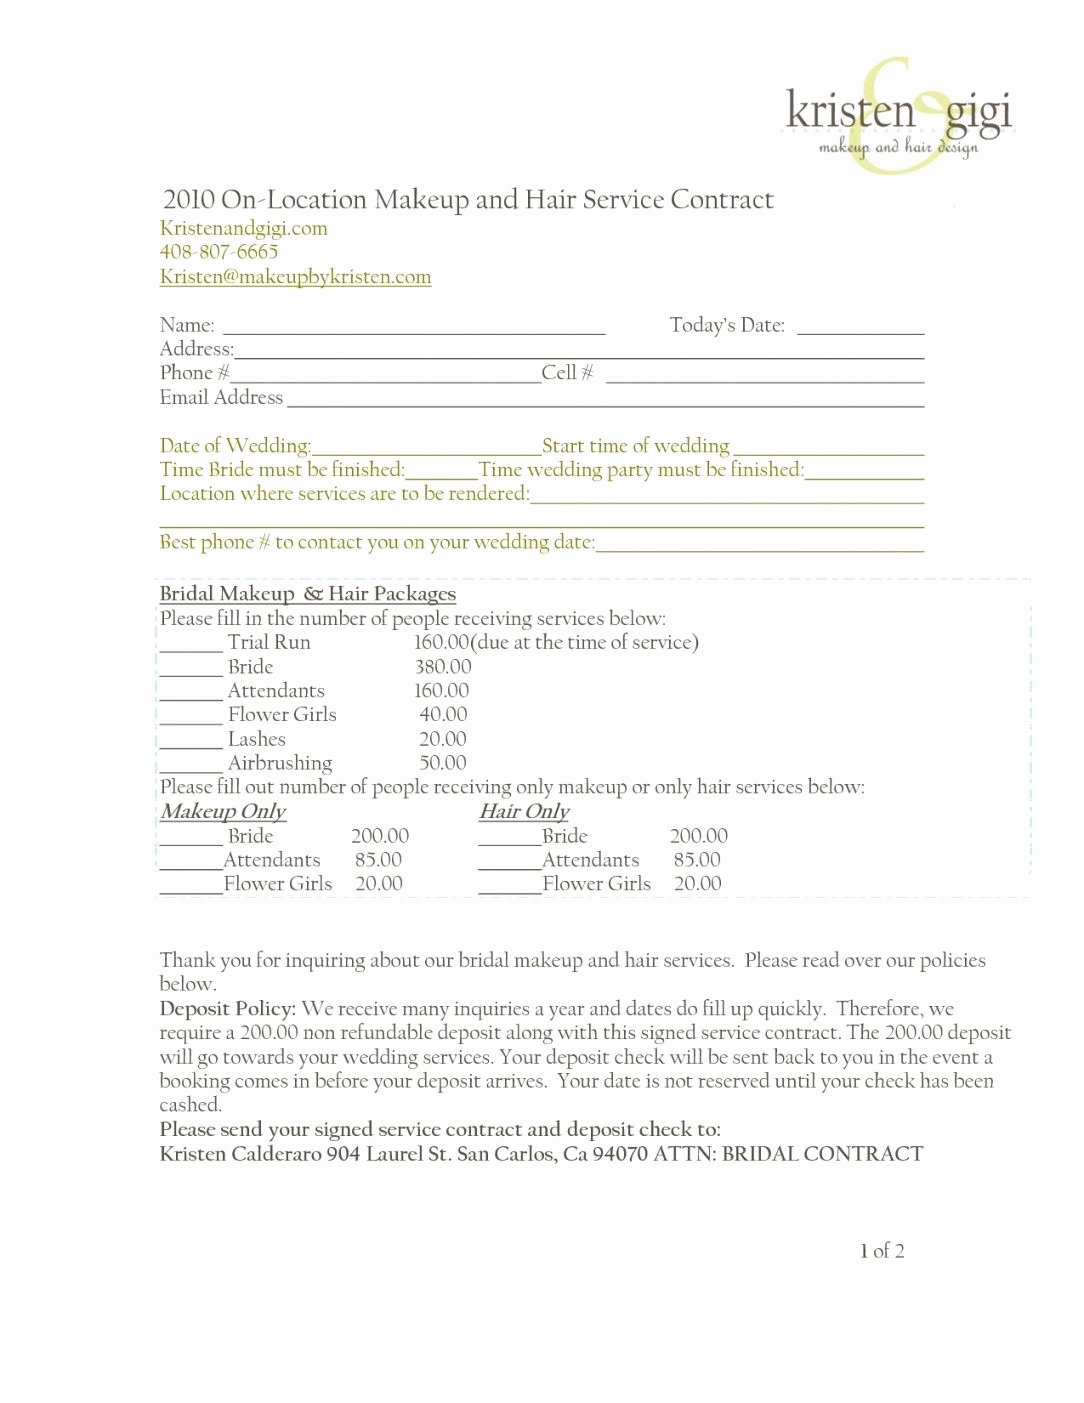 Wedding Hair and Makeup Contract Template Fresh Wedding Hair and Makeup Contract Template